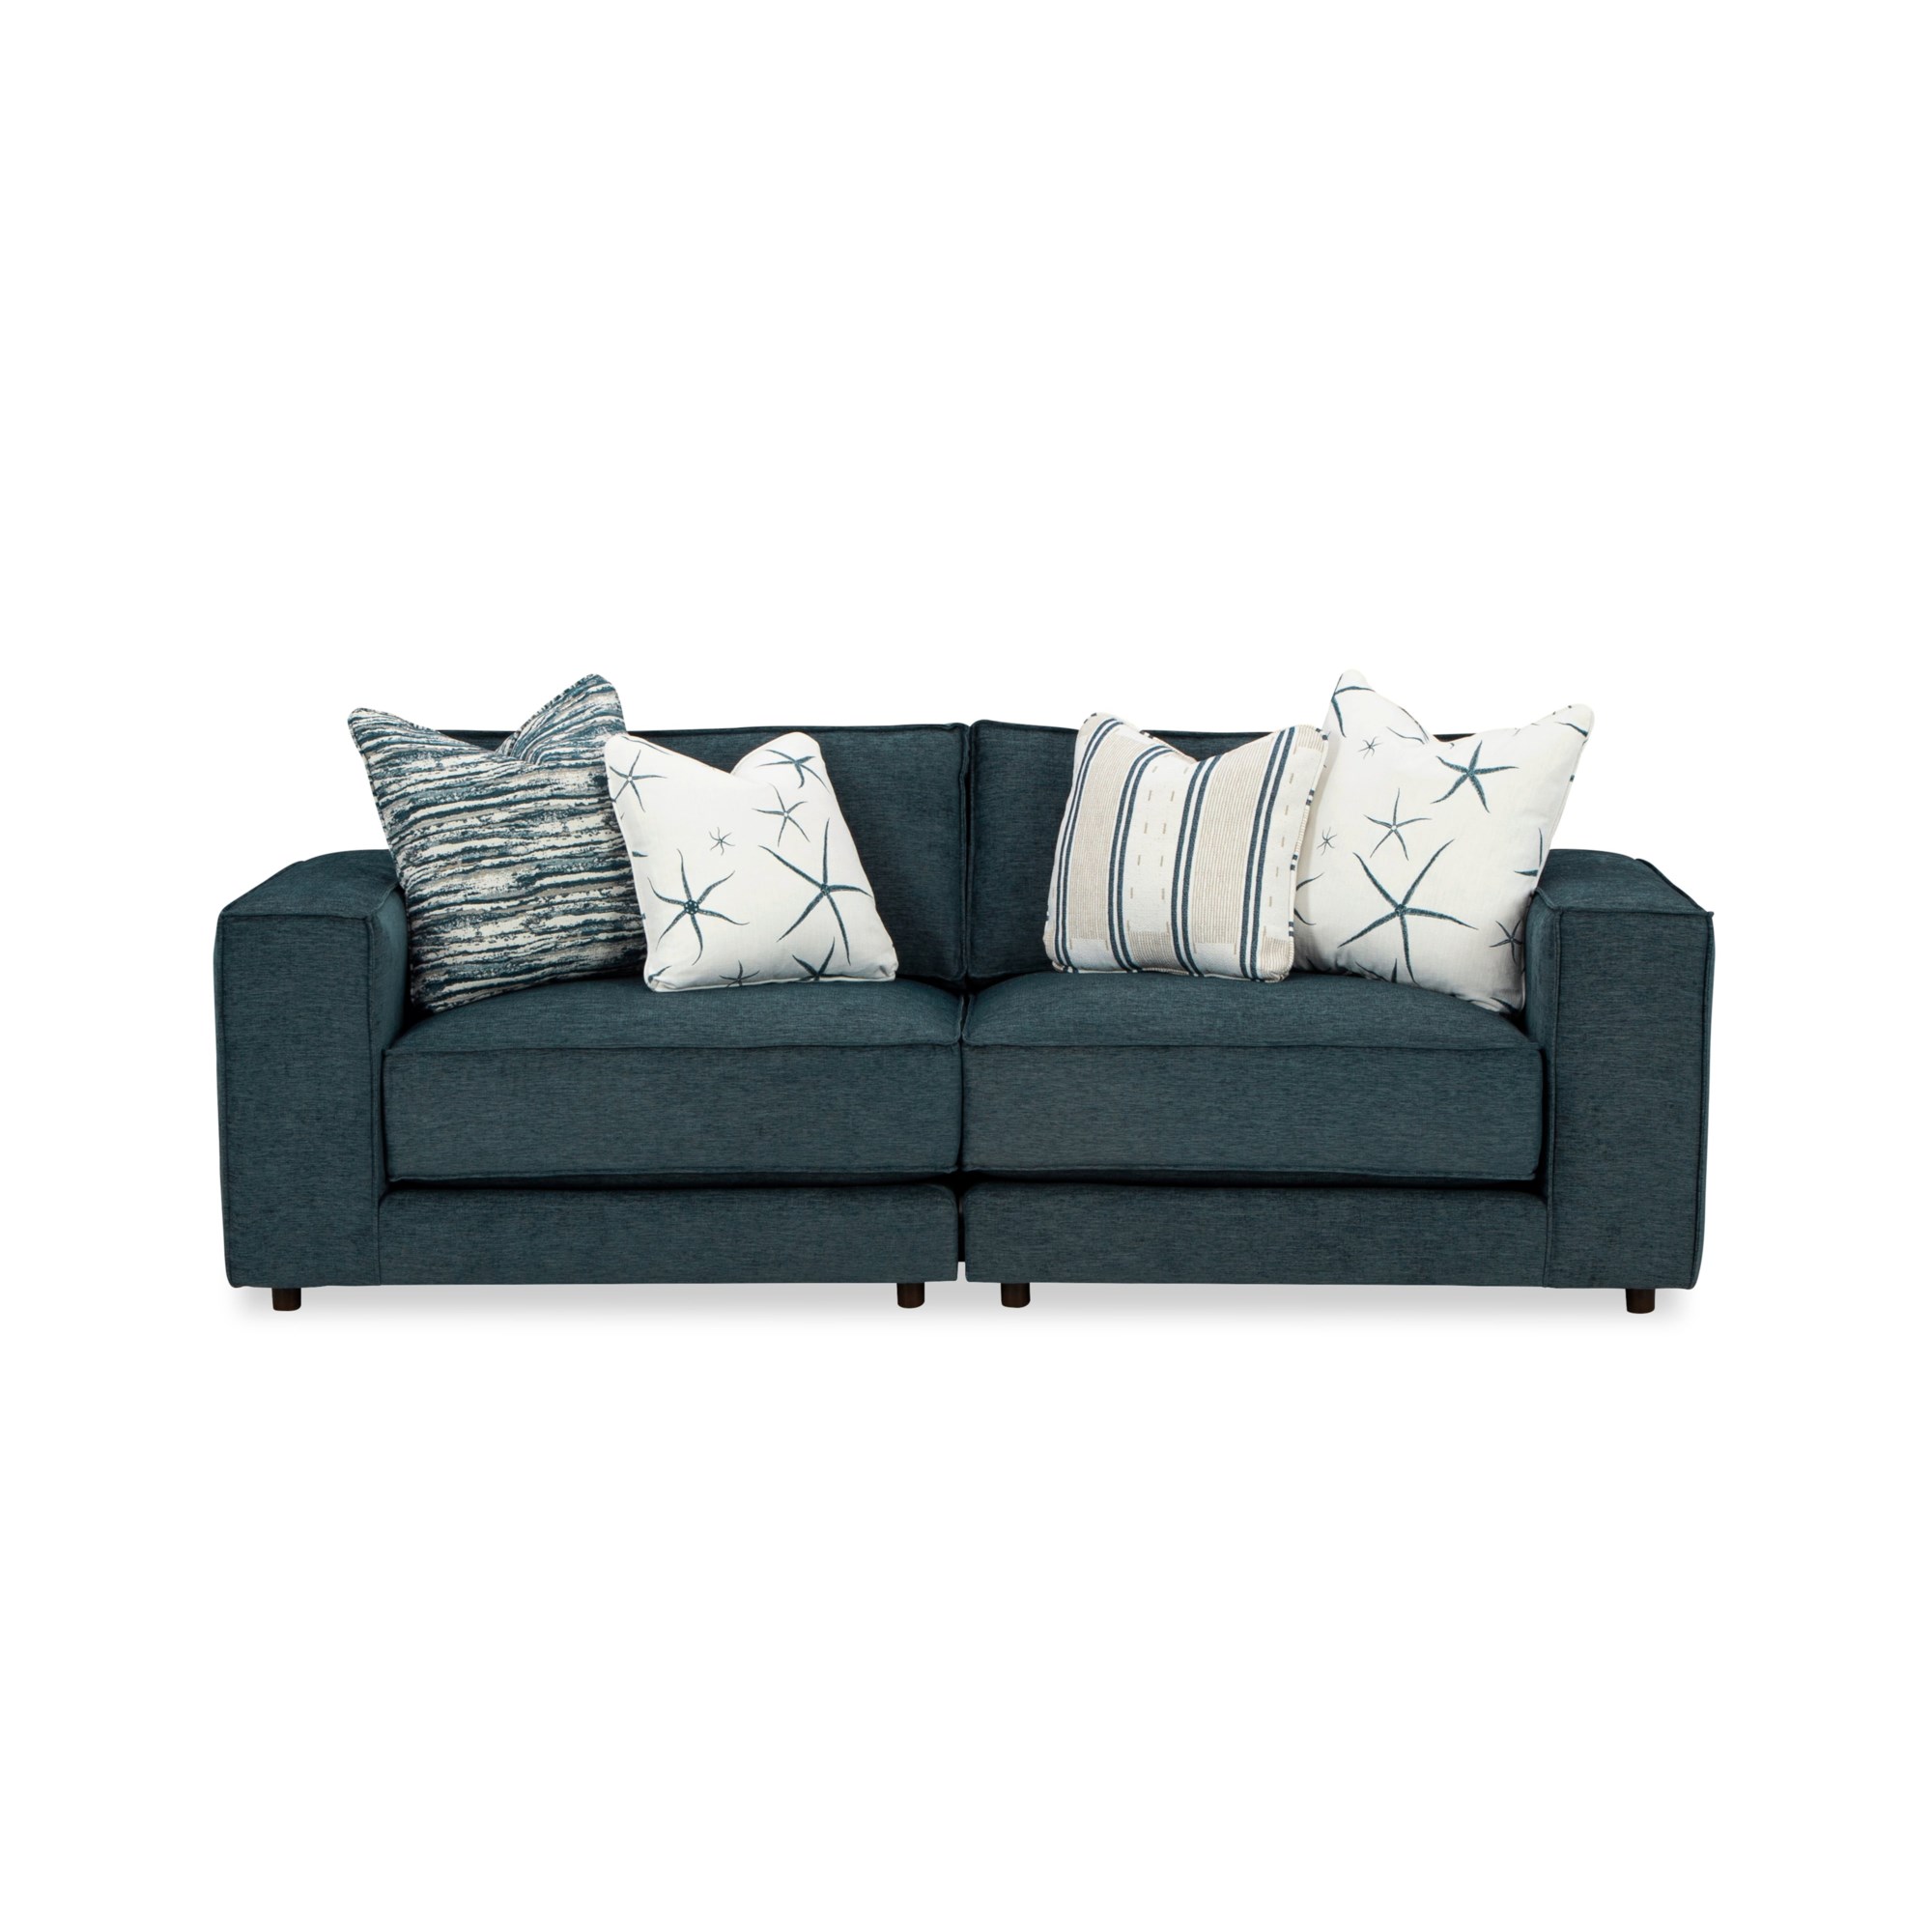 Craftmaster 734801BD 734819BDx1+734818BDx1 ROBBIE-23 with | Contemporary | Sofas 2 Furniture Home - Uph Sofa Seats Stationary Collections Modular